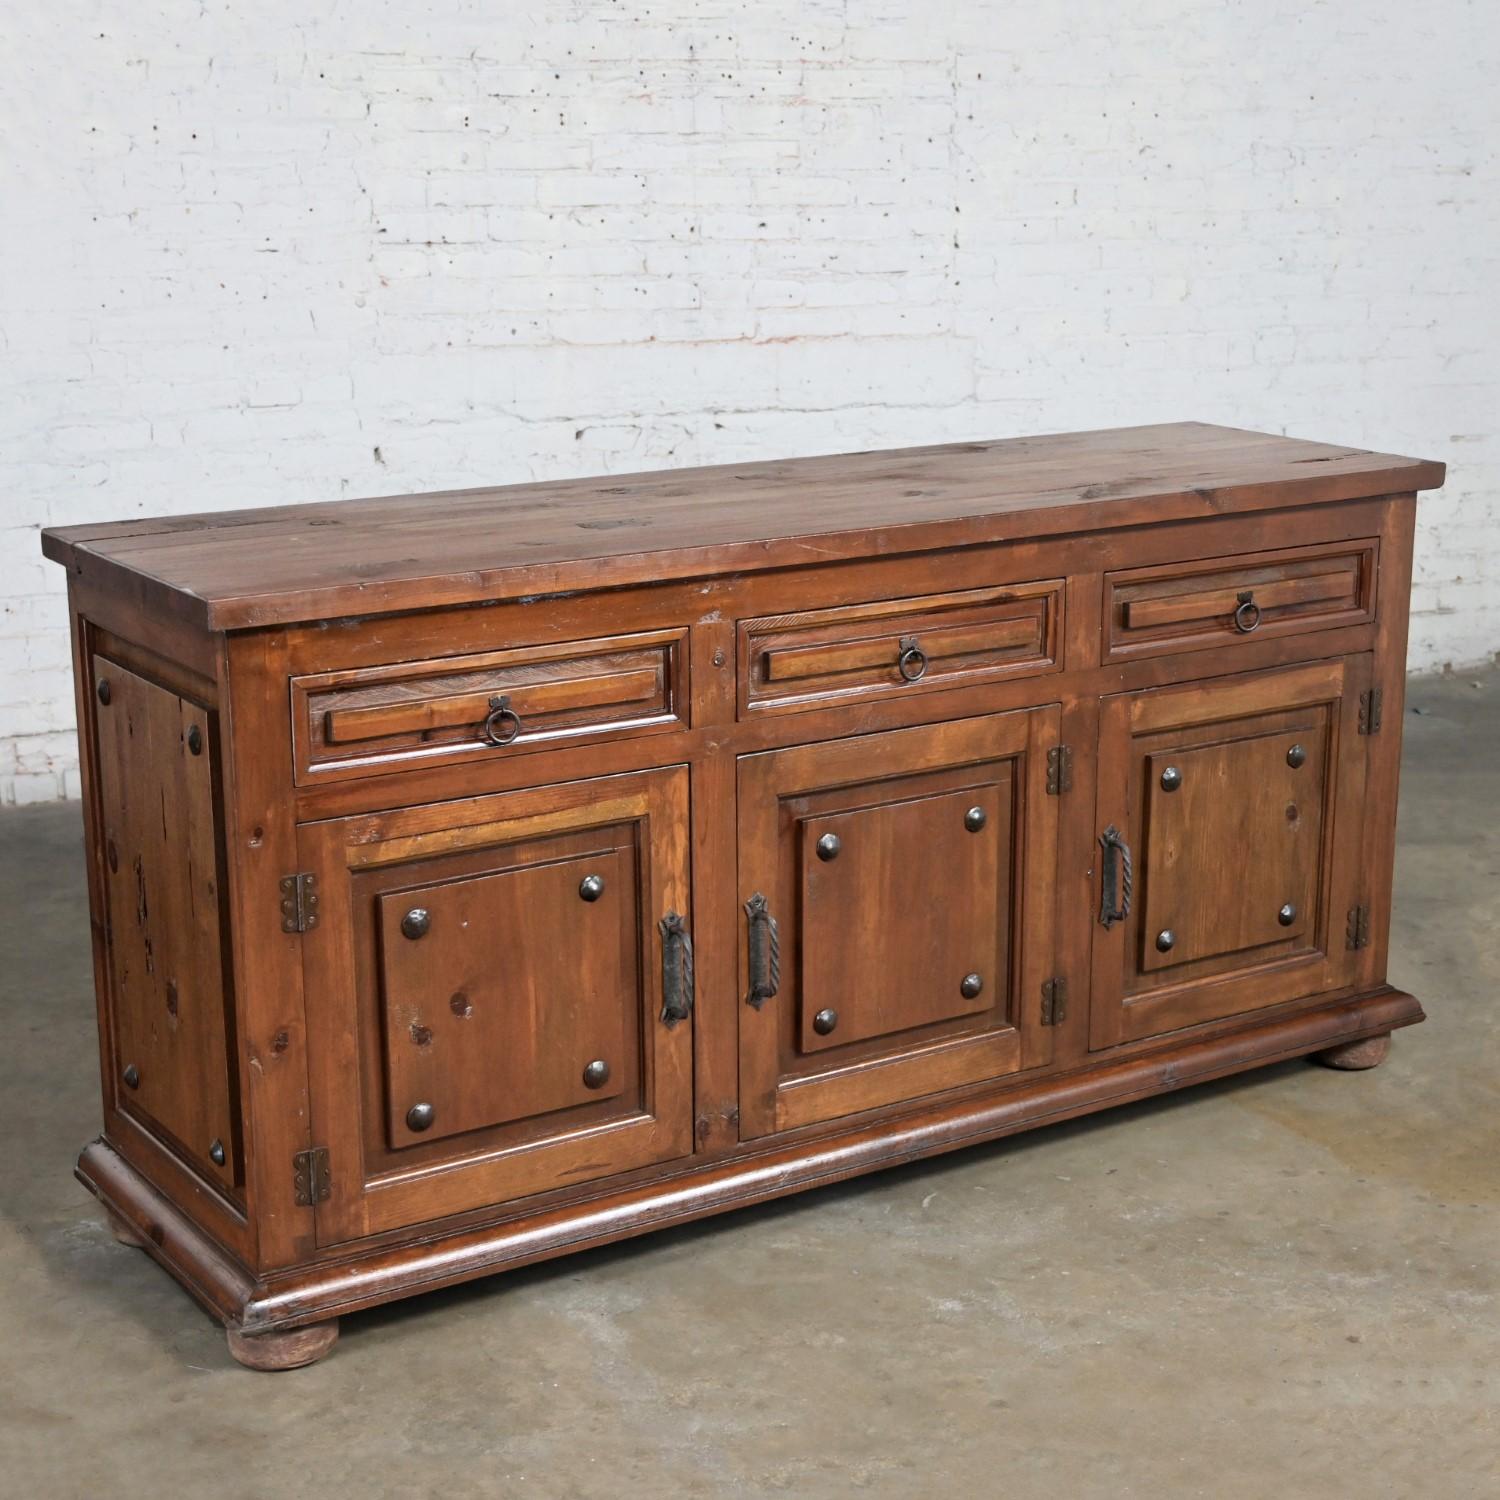 Unknown Spanish Revival Rustic Solid Pine Sideboard Style of Artes De Mexico Intern'tnl  For Sale